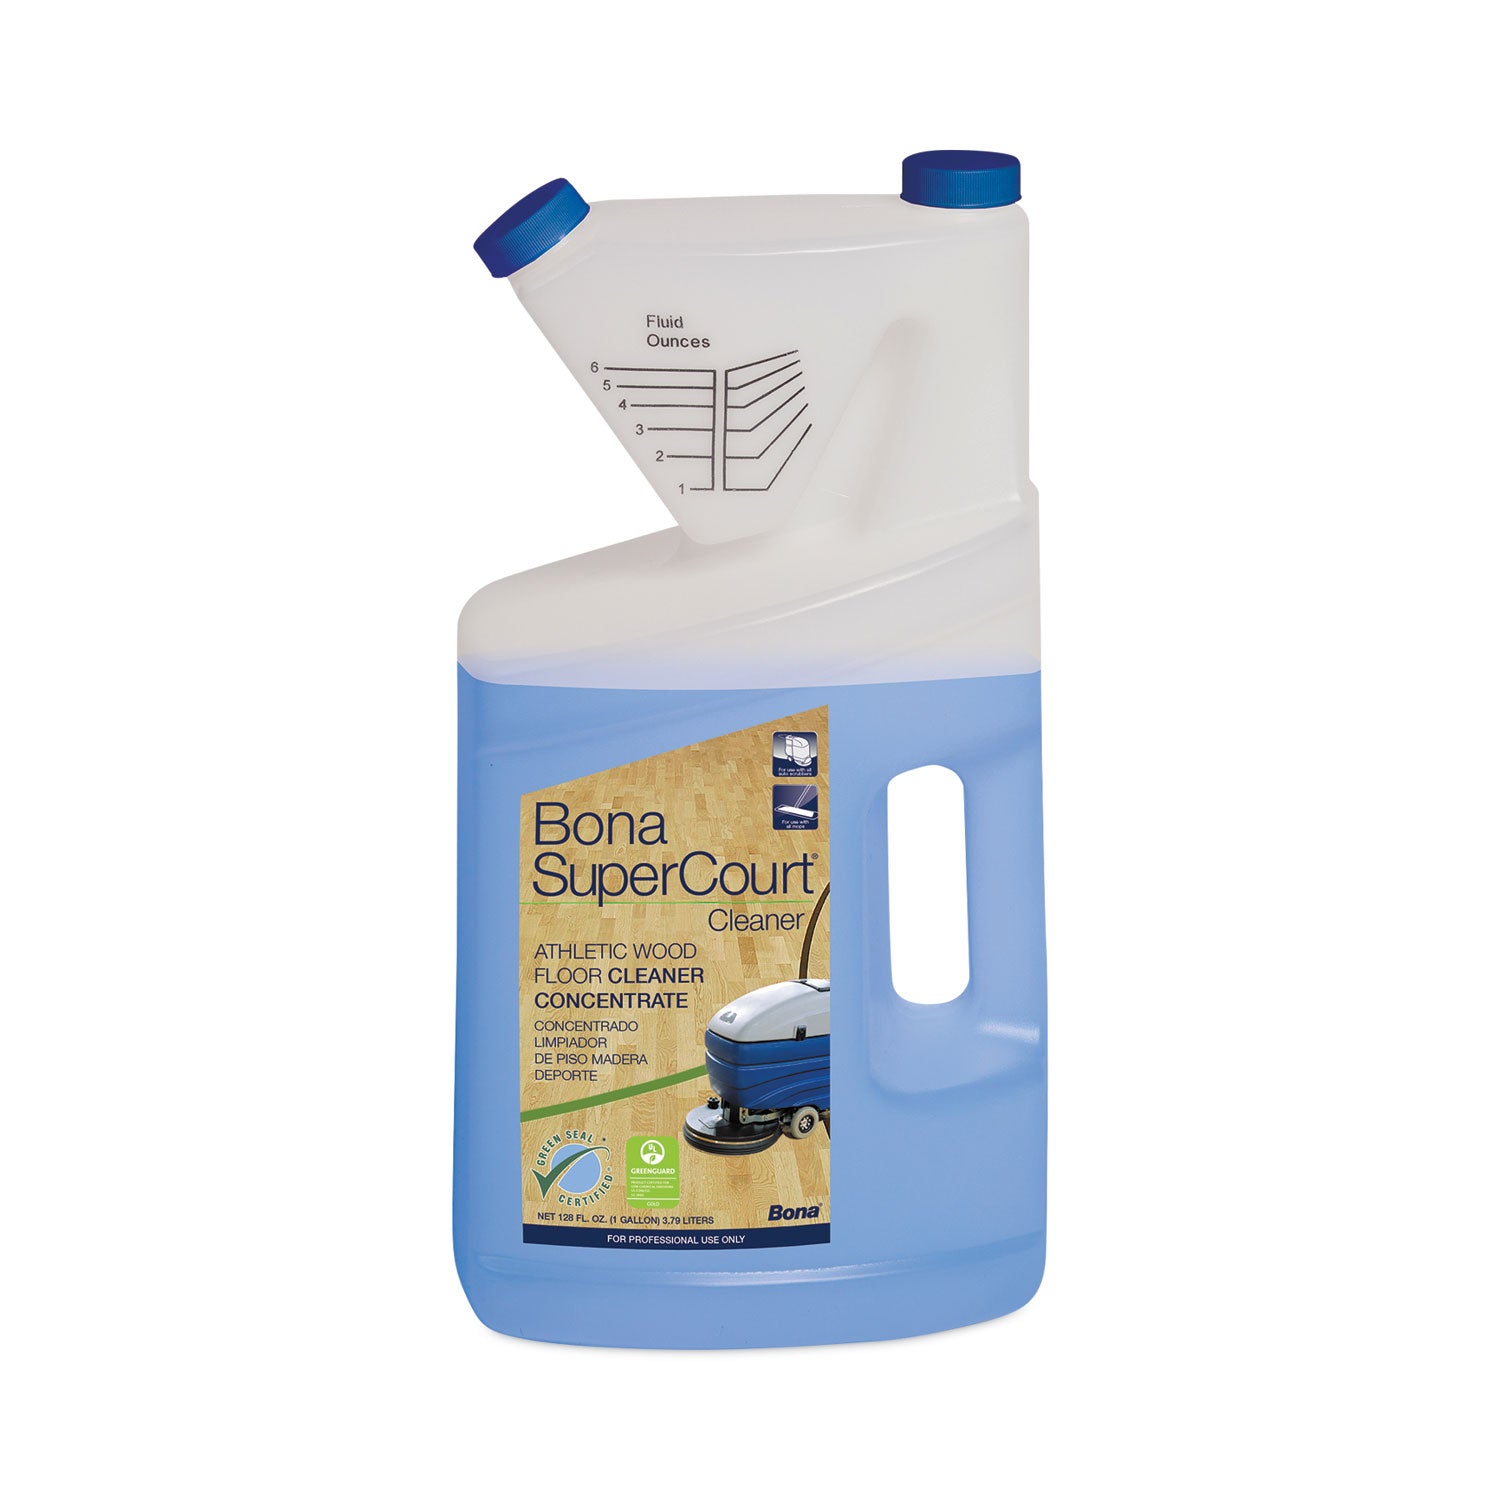 supercourt-cleaner-concentrate-1-gal-bottle_bnawm700018184 - 1